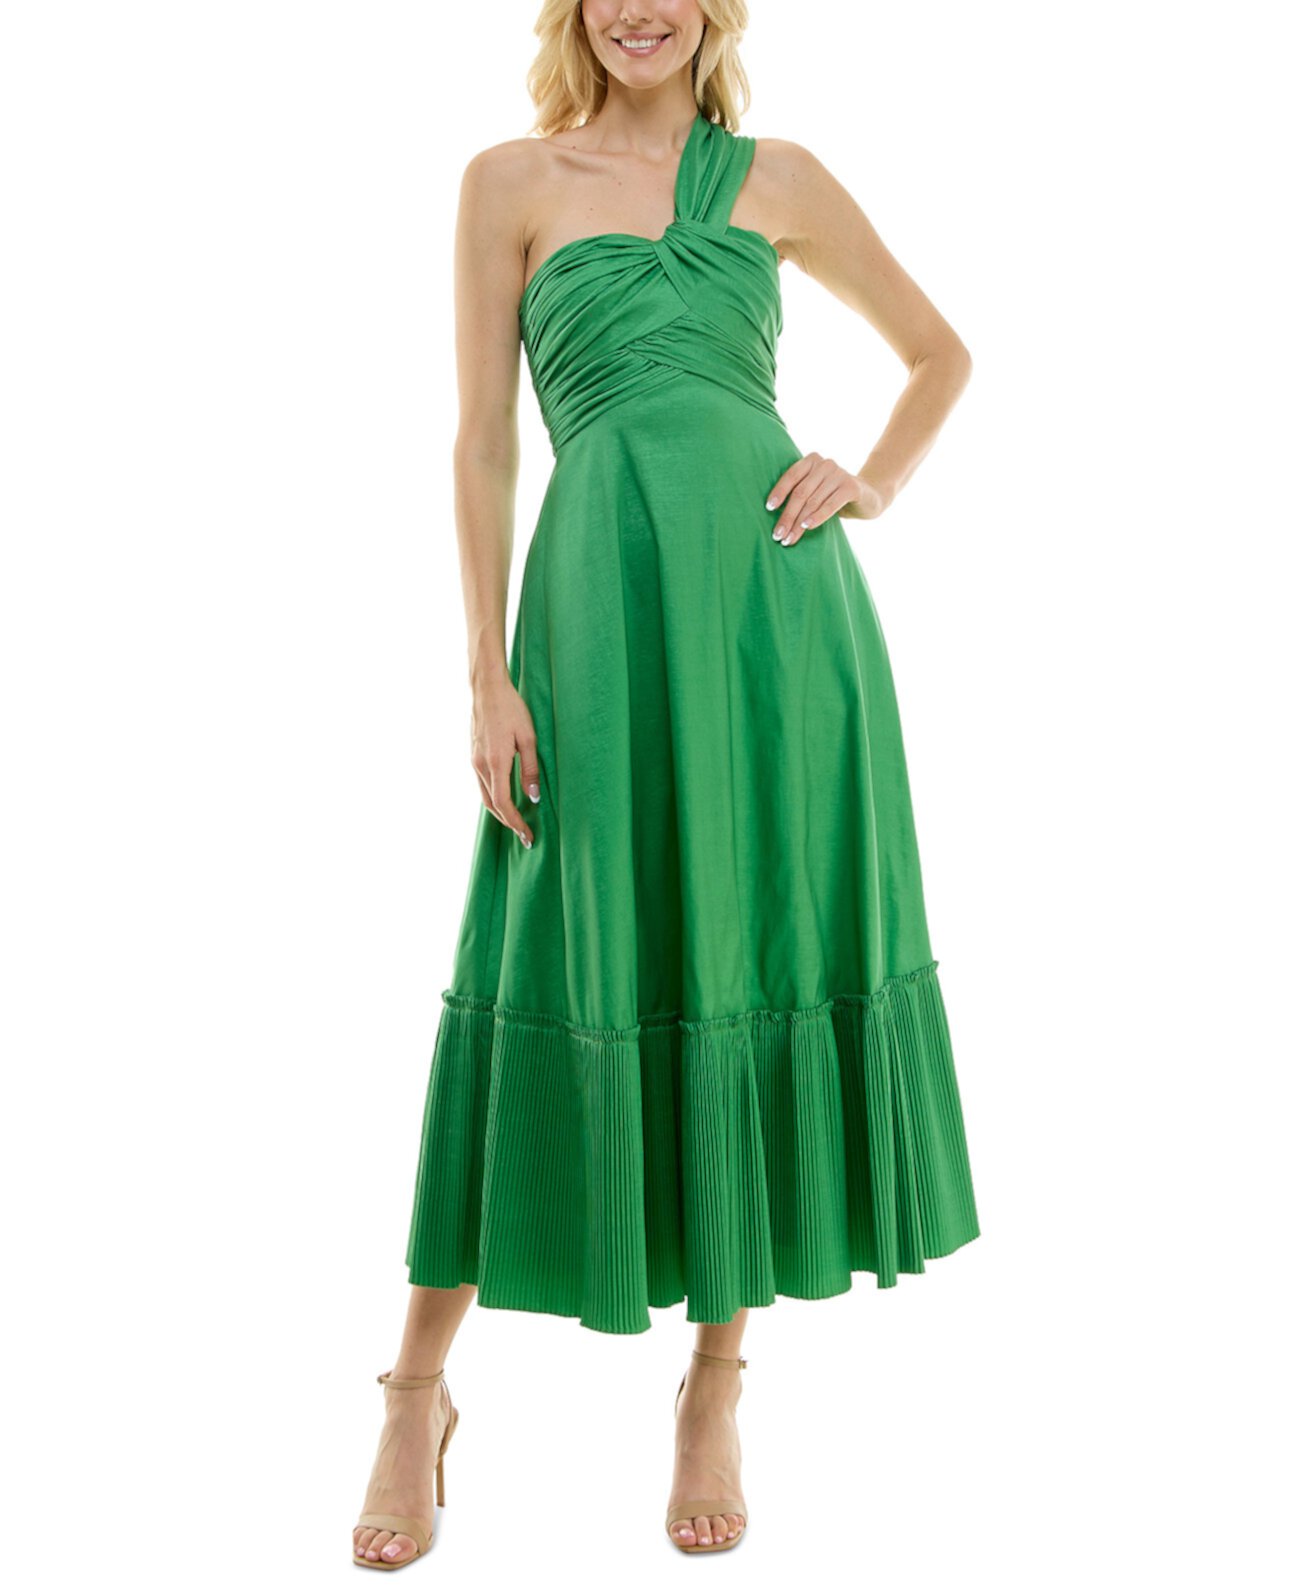 Women's Ruched One-Shoulder Gown Taylor